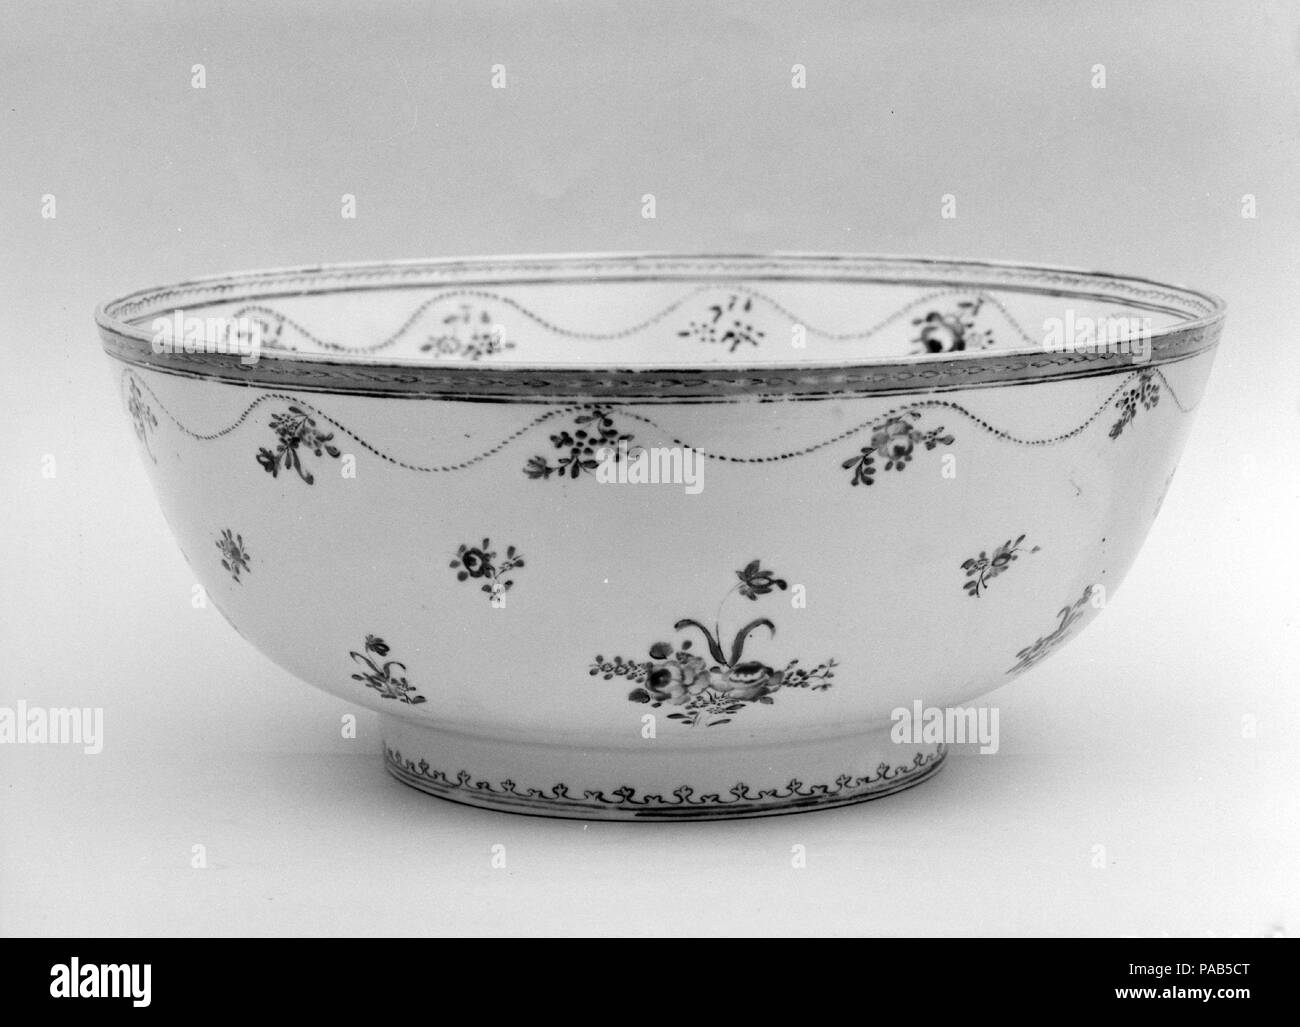 Bol. Culture : le chinois. Dimensions : H. 4 1/4 in. (10,8 cm) ; Diam. 10 1/4 in. (26 cm). Date : 1736-95. Musée : Metropolitan Museum of Art, New York, USA. Banque D'Images